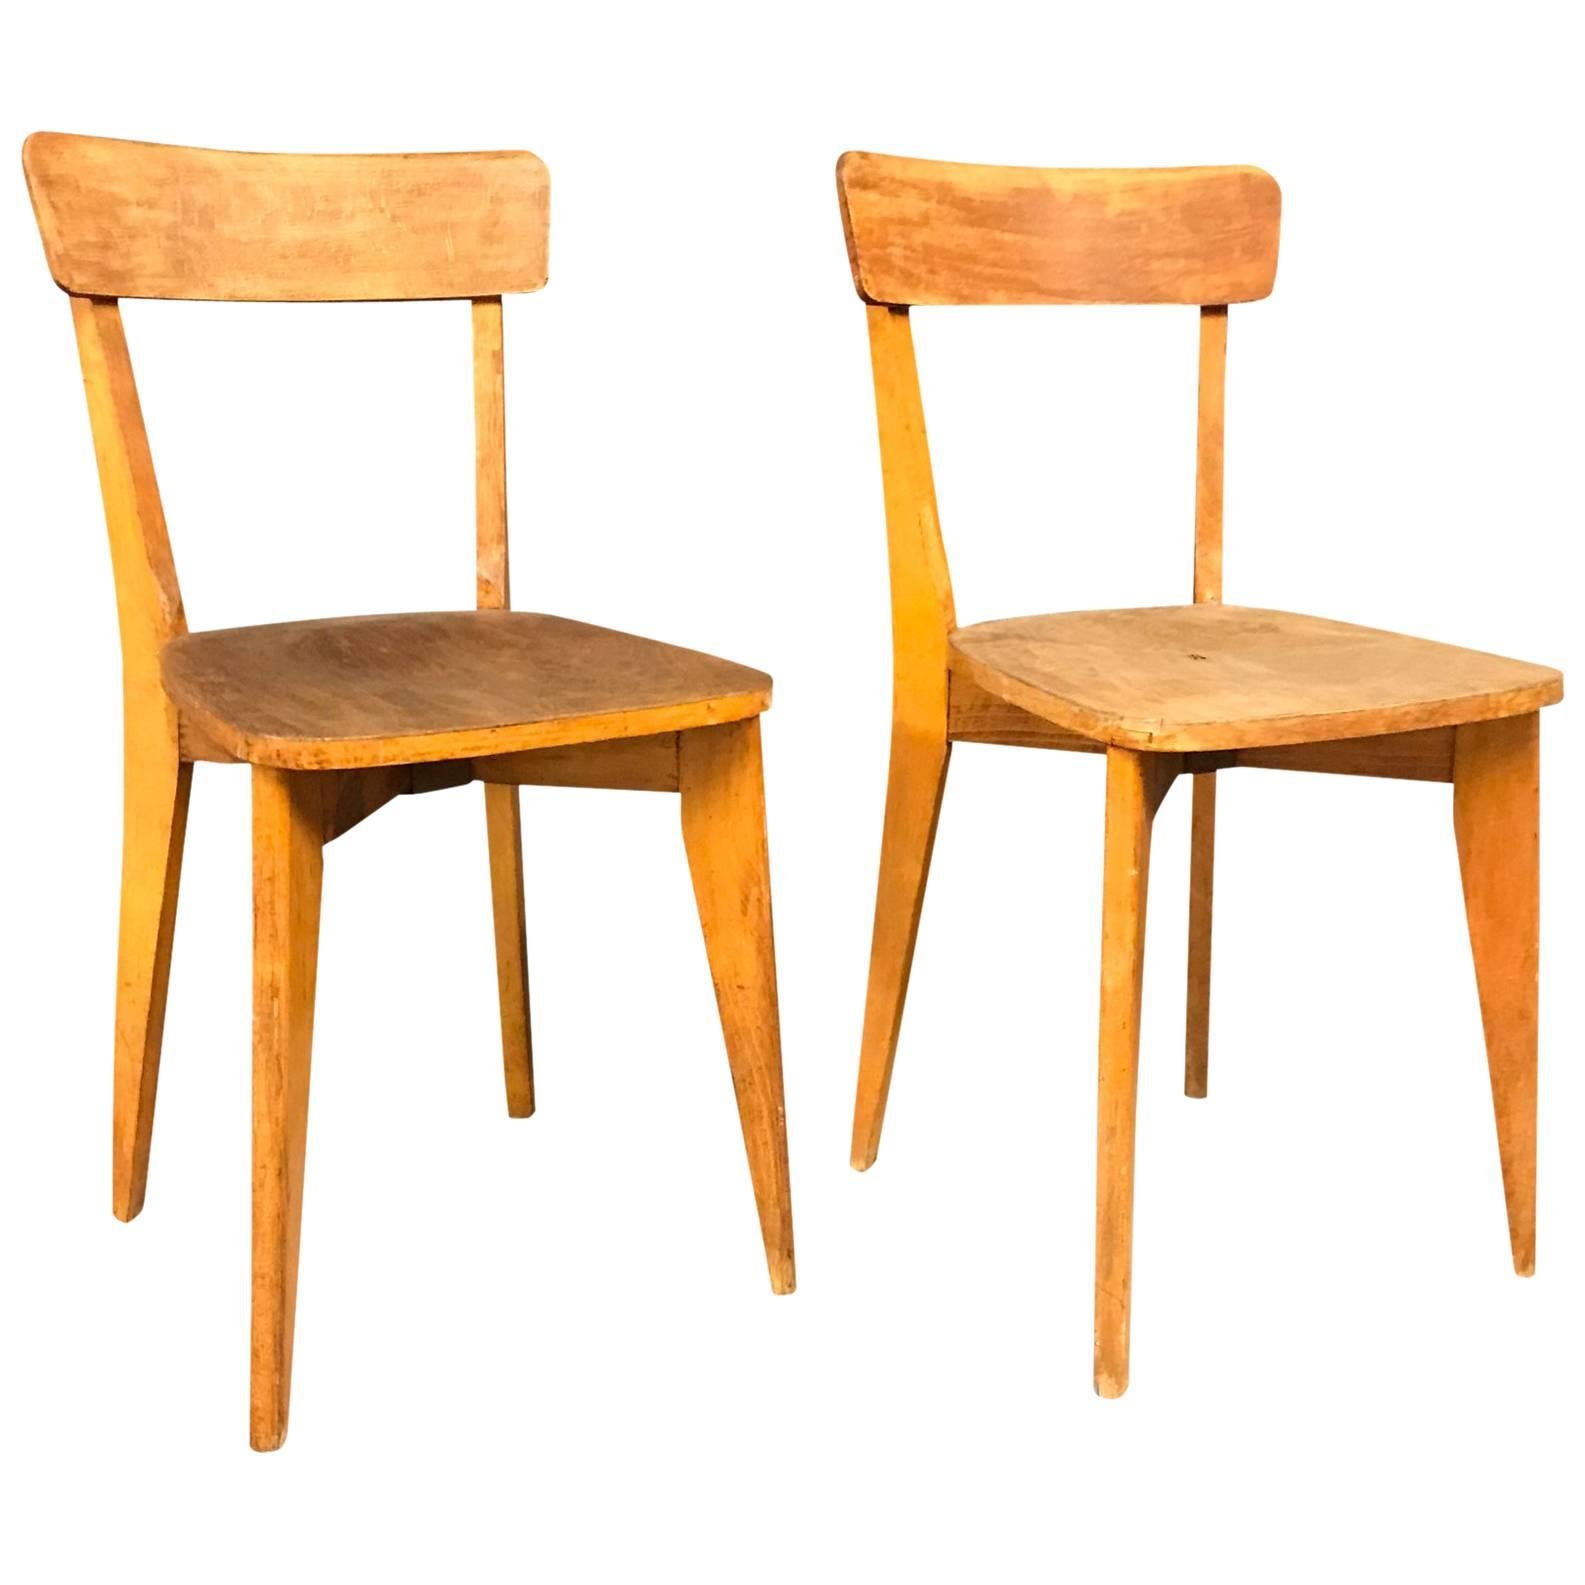 Set of Two Wooden Bistro Chairs For Sale